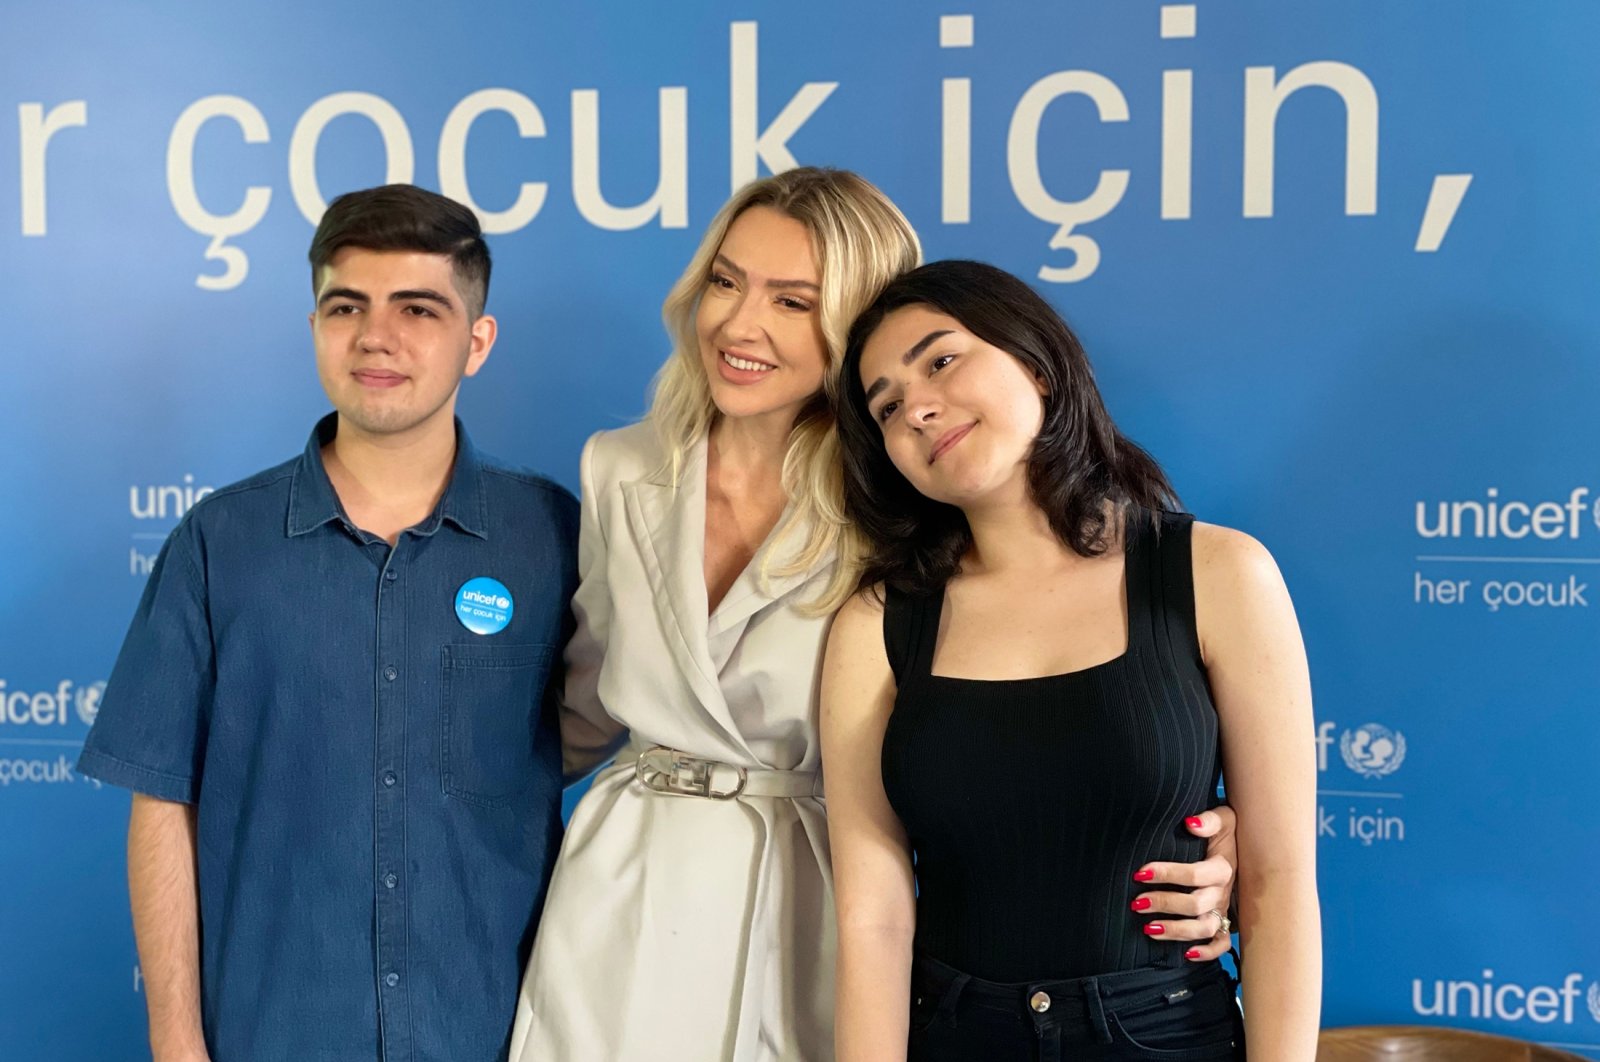 Hadise (C) poses with Resul (L) and Nehir, during a UNICEF event in Istanbul, Turkey, July 7, 2022. (Photo by Daily Sabah&#039;s Ahmet Koçak)